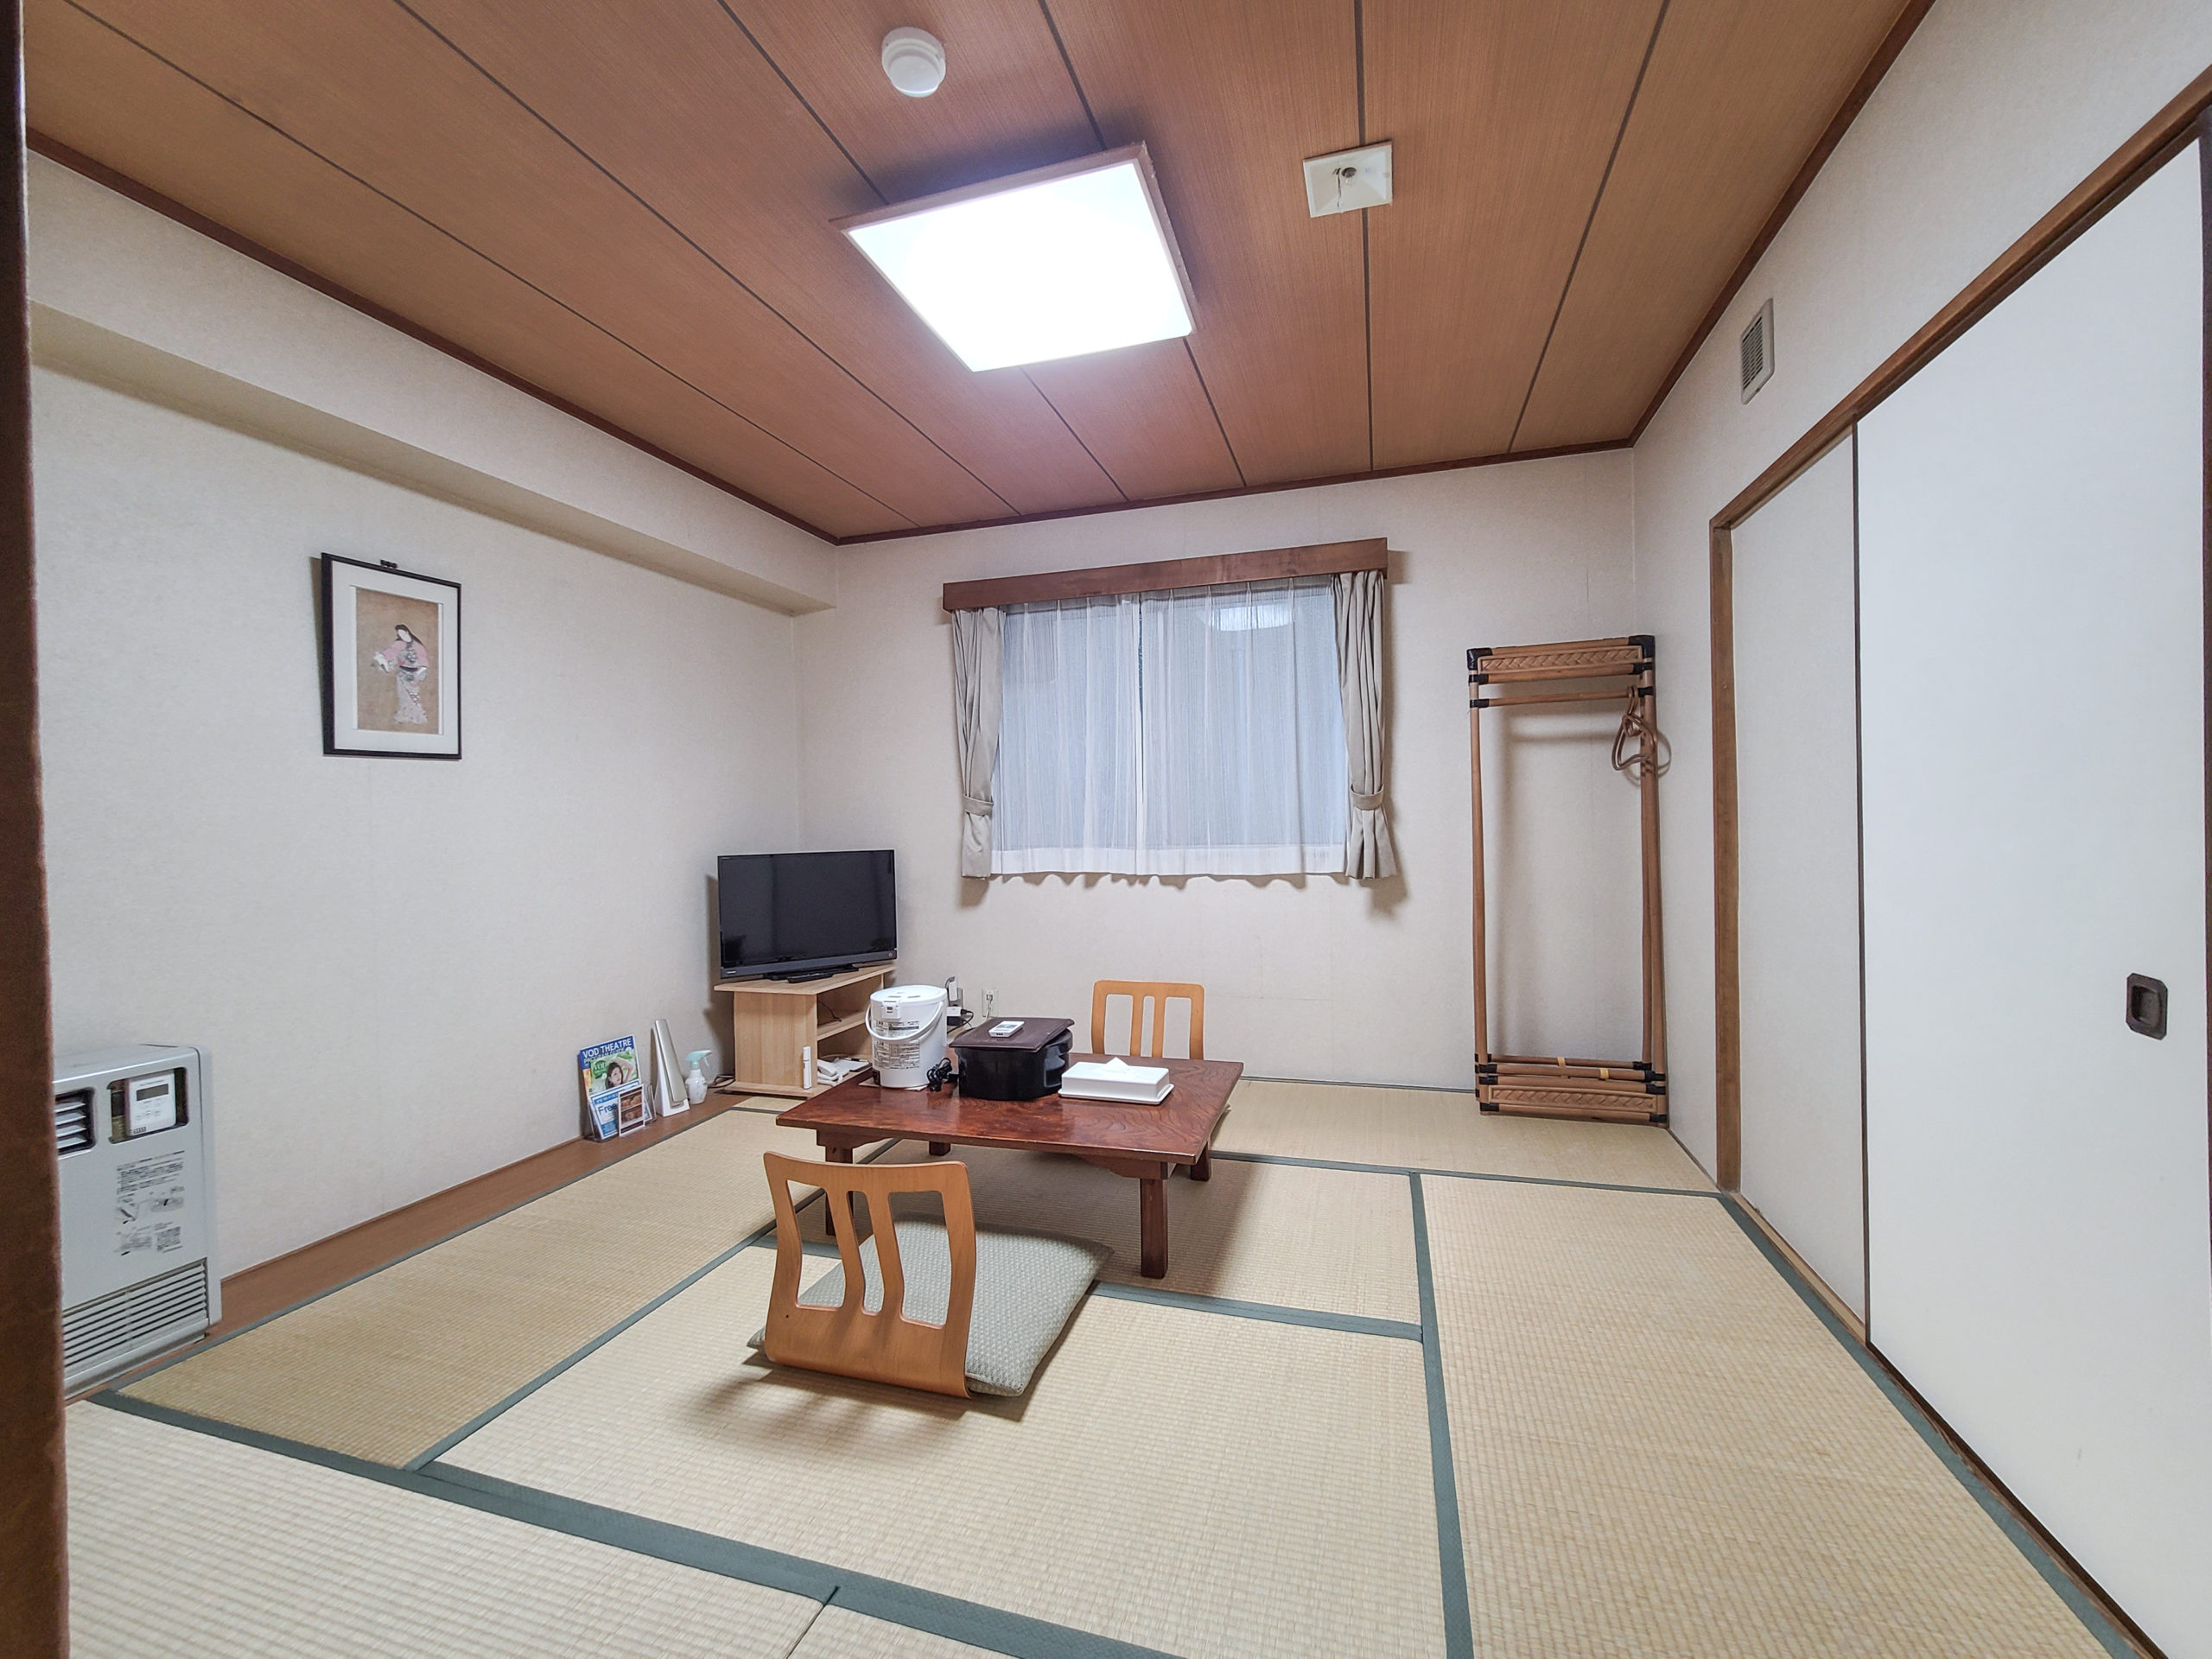 The tatami room is a popular choice for families